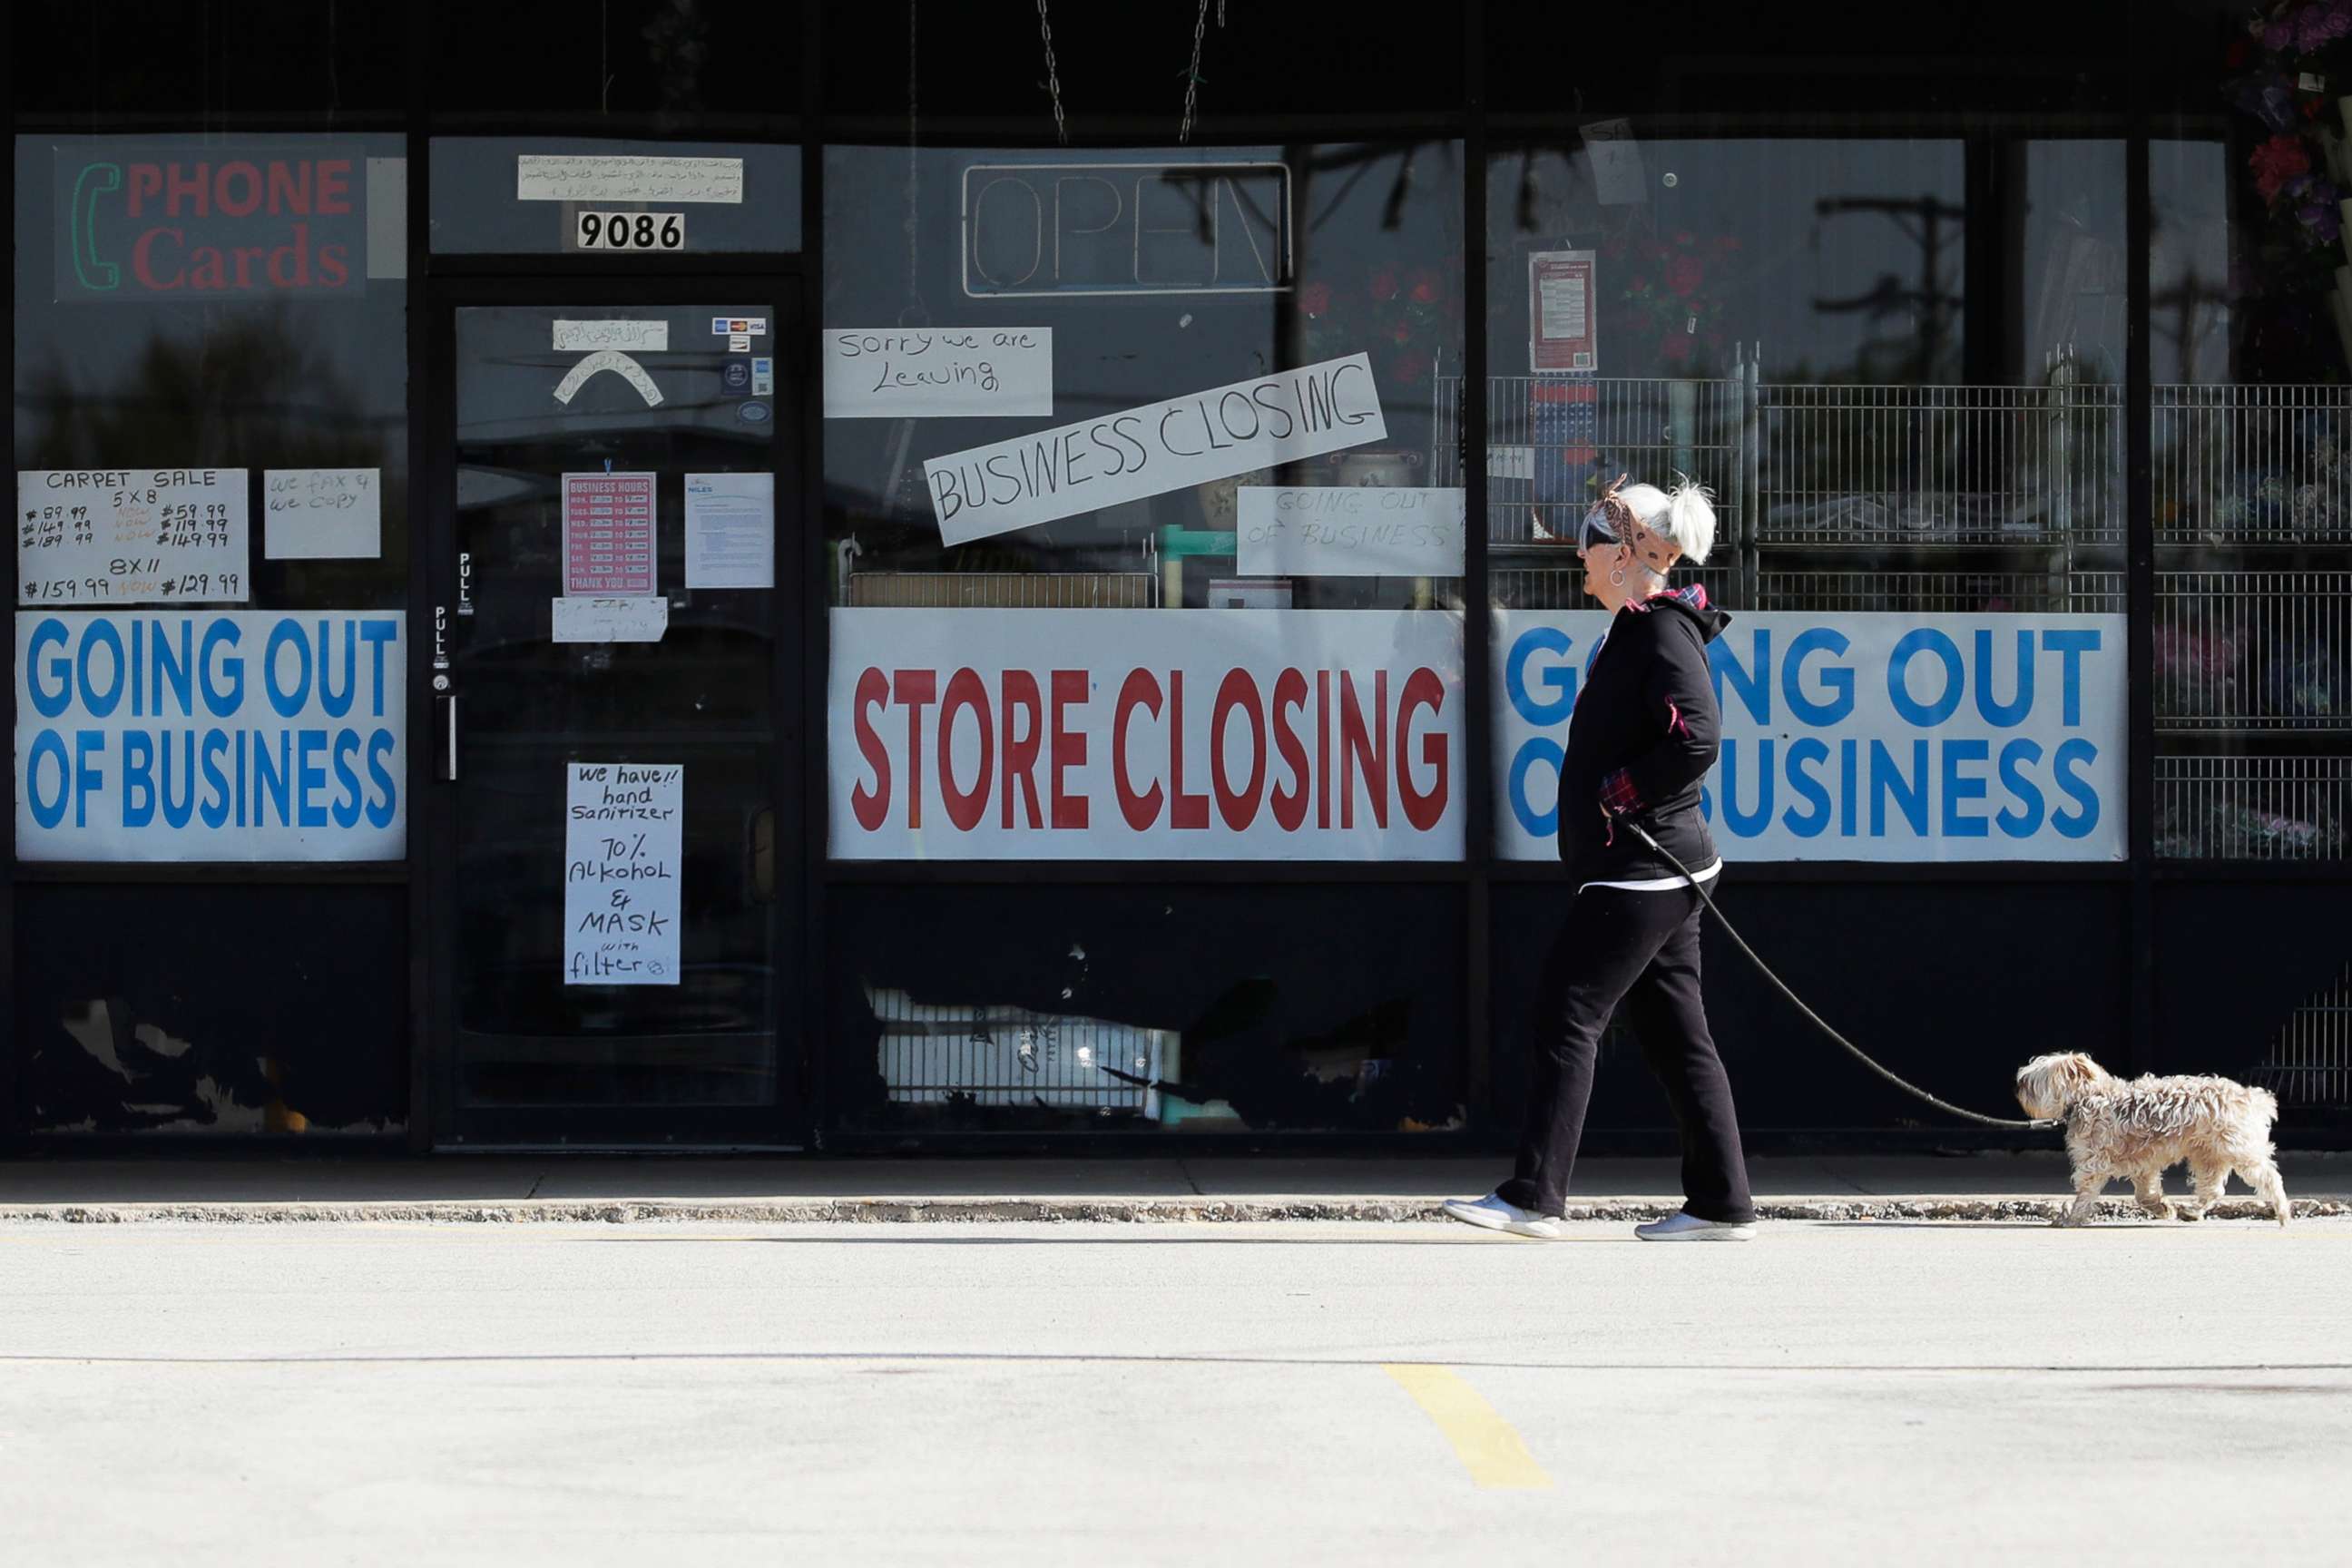 PHOTO: A woman takes walk with a dog in front of the closing signs displayed in a store's window front in Niles, Ill., May 13, 2020.